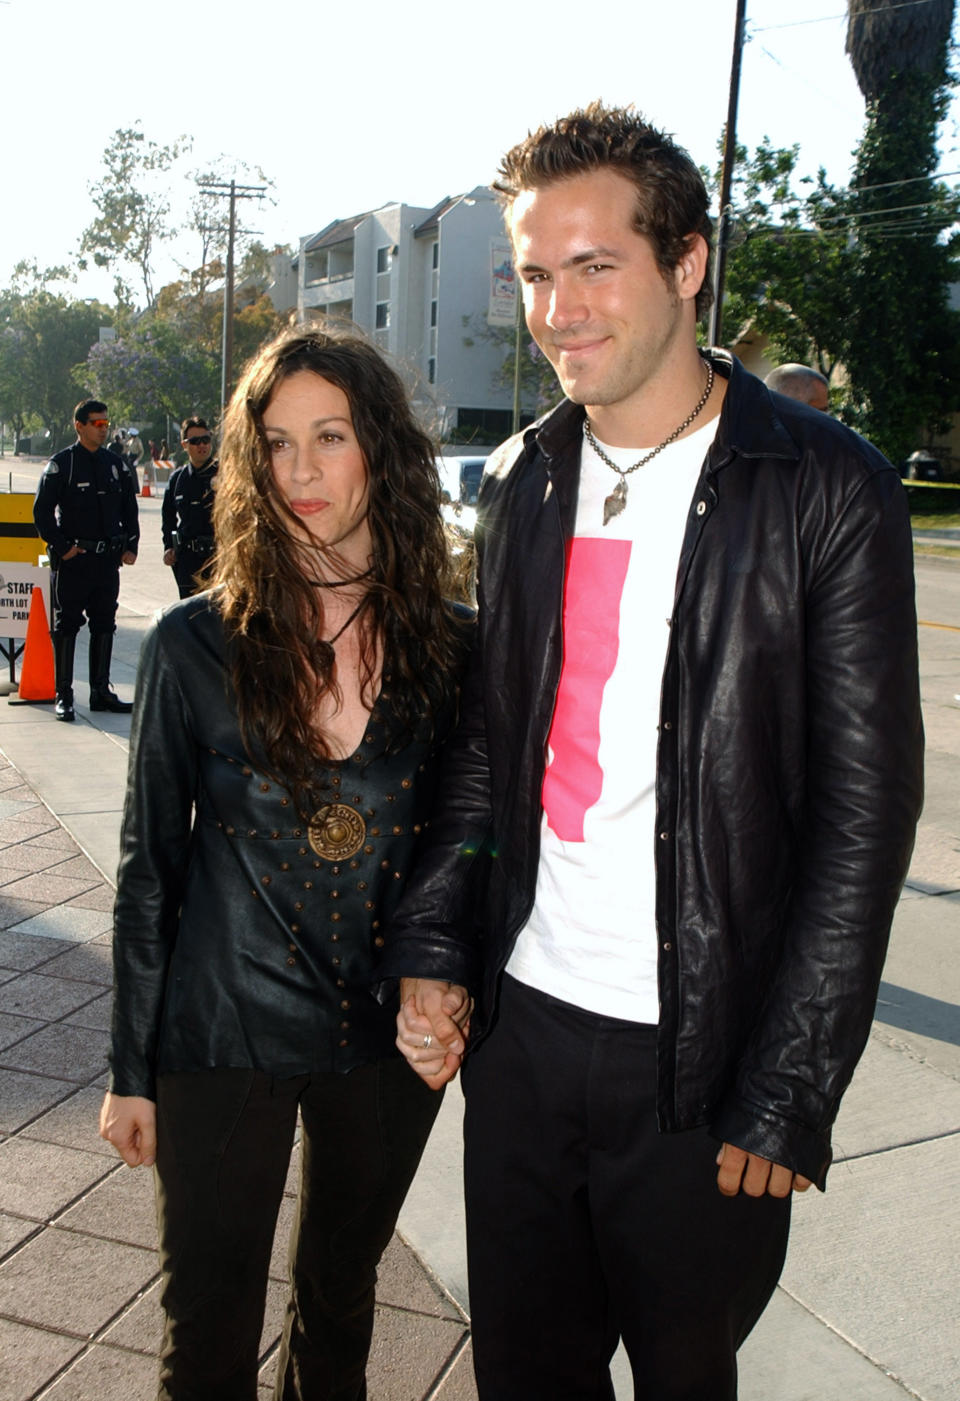 Alanis Morissette and Ryan Reynolds at the 2003 MTV Movie Awards - Arrivals at The Shrine Auditorium in Los Angeles, CA